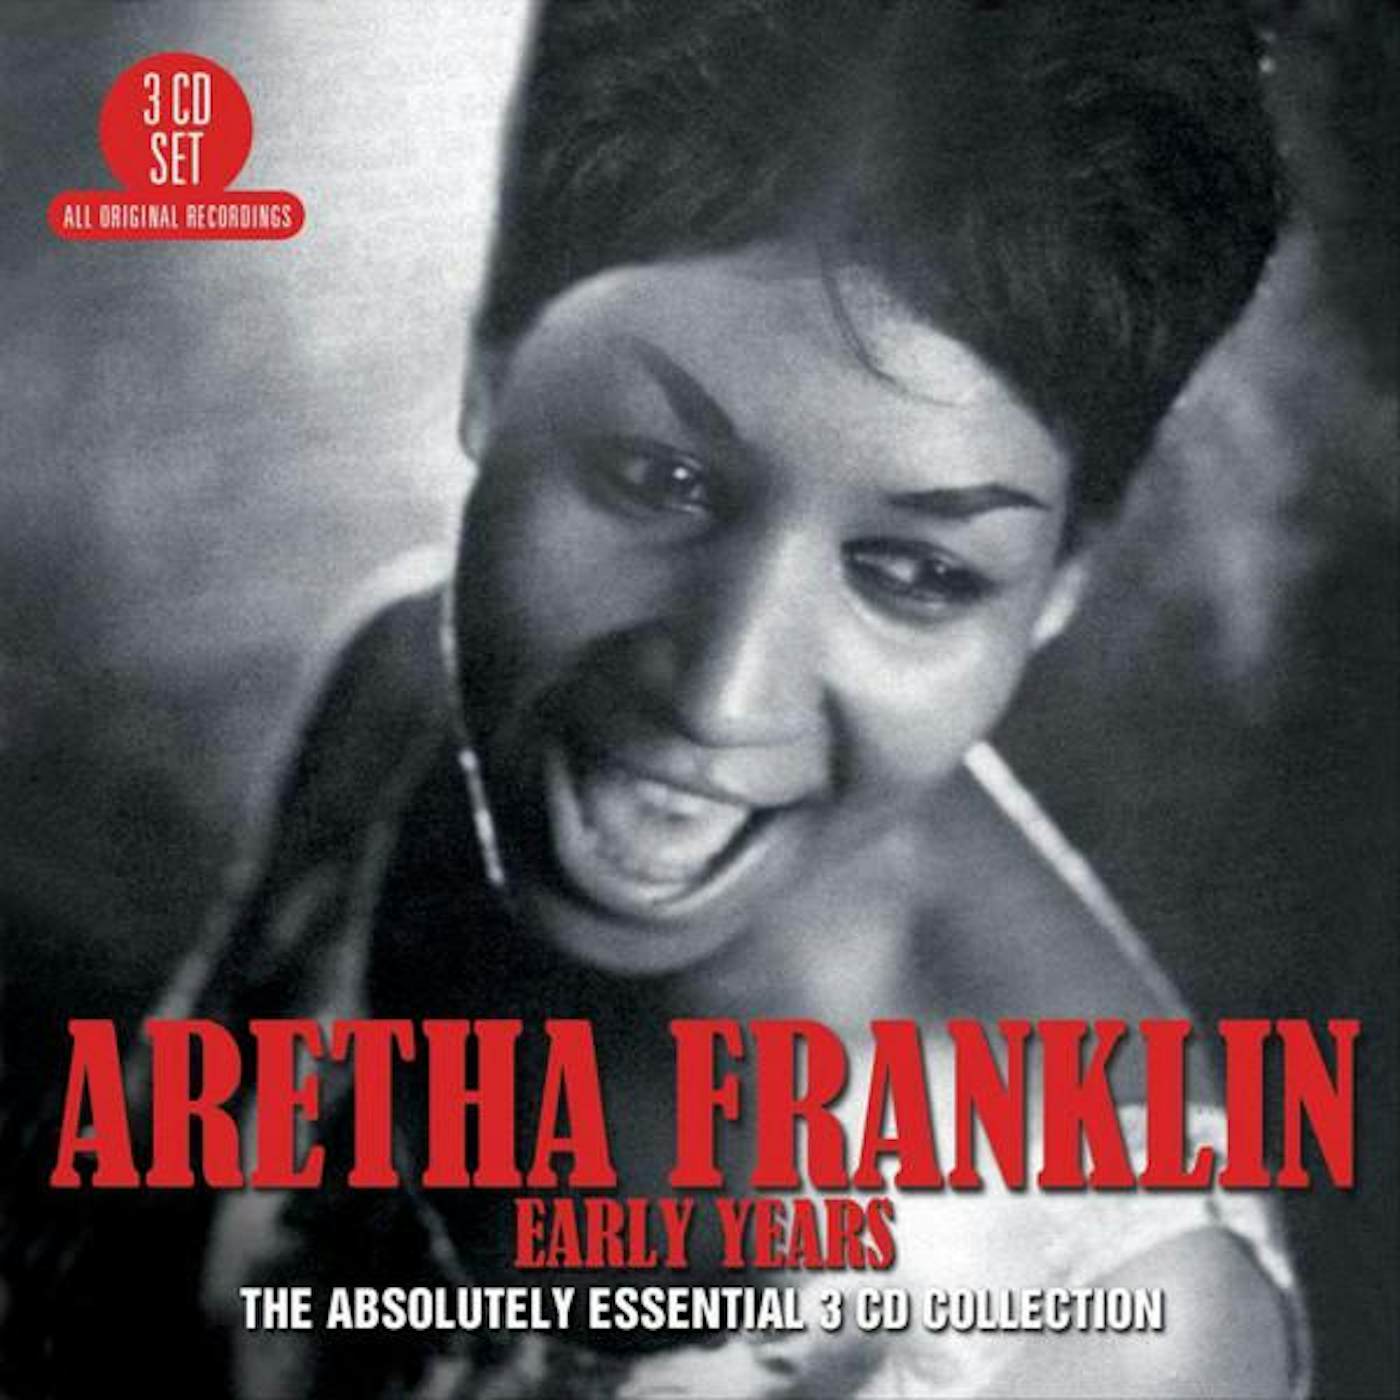 Aretha Franklin ABSOLUTELY ESSENTIAL 3CD COLLECTION CD